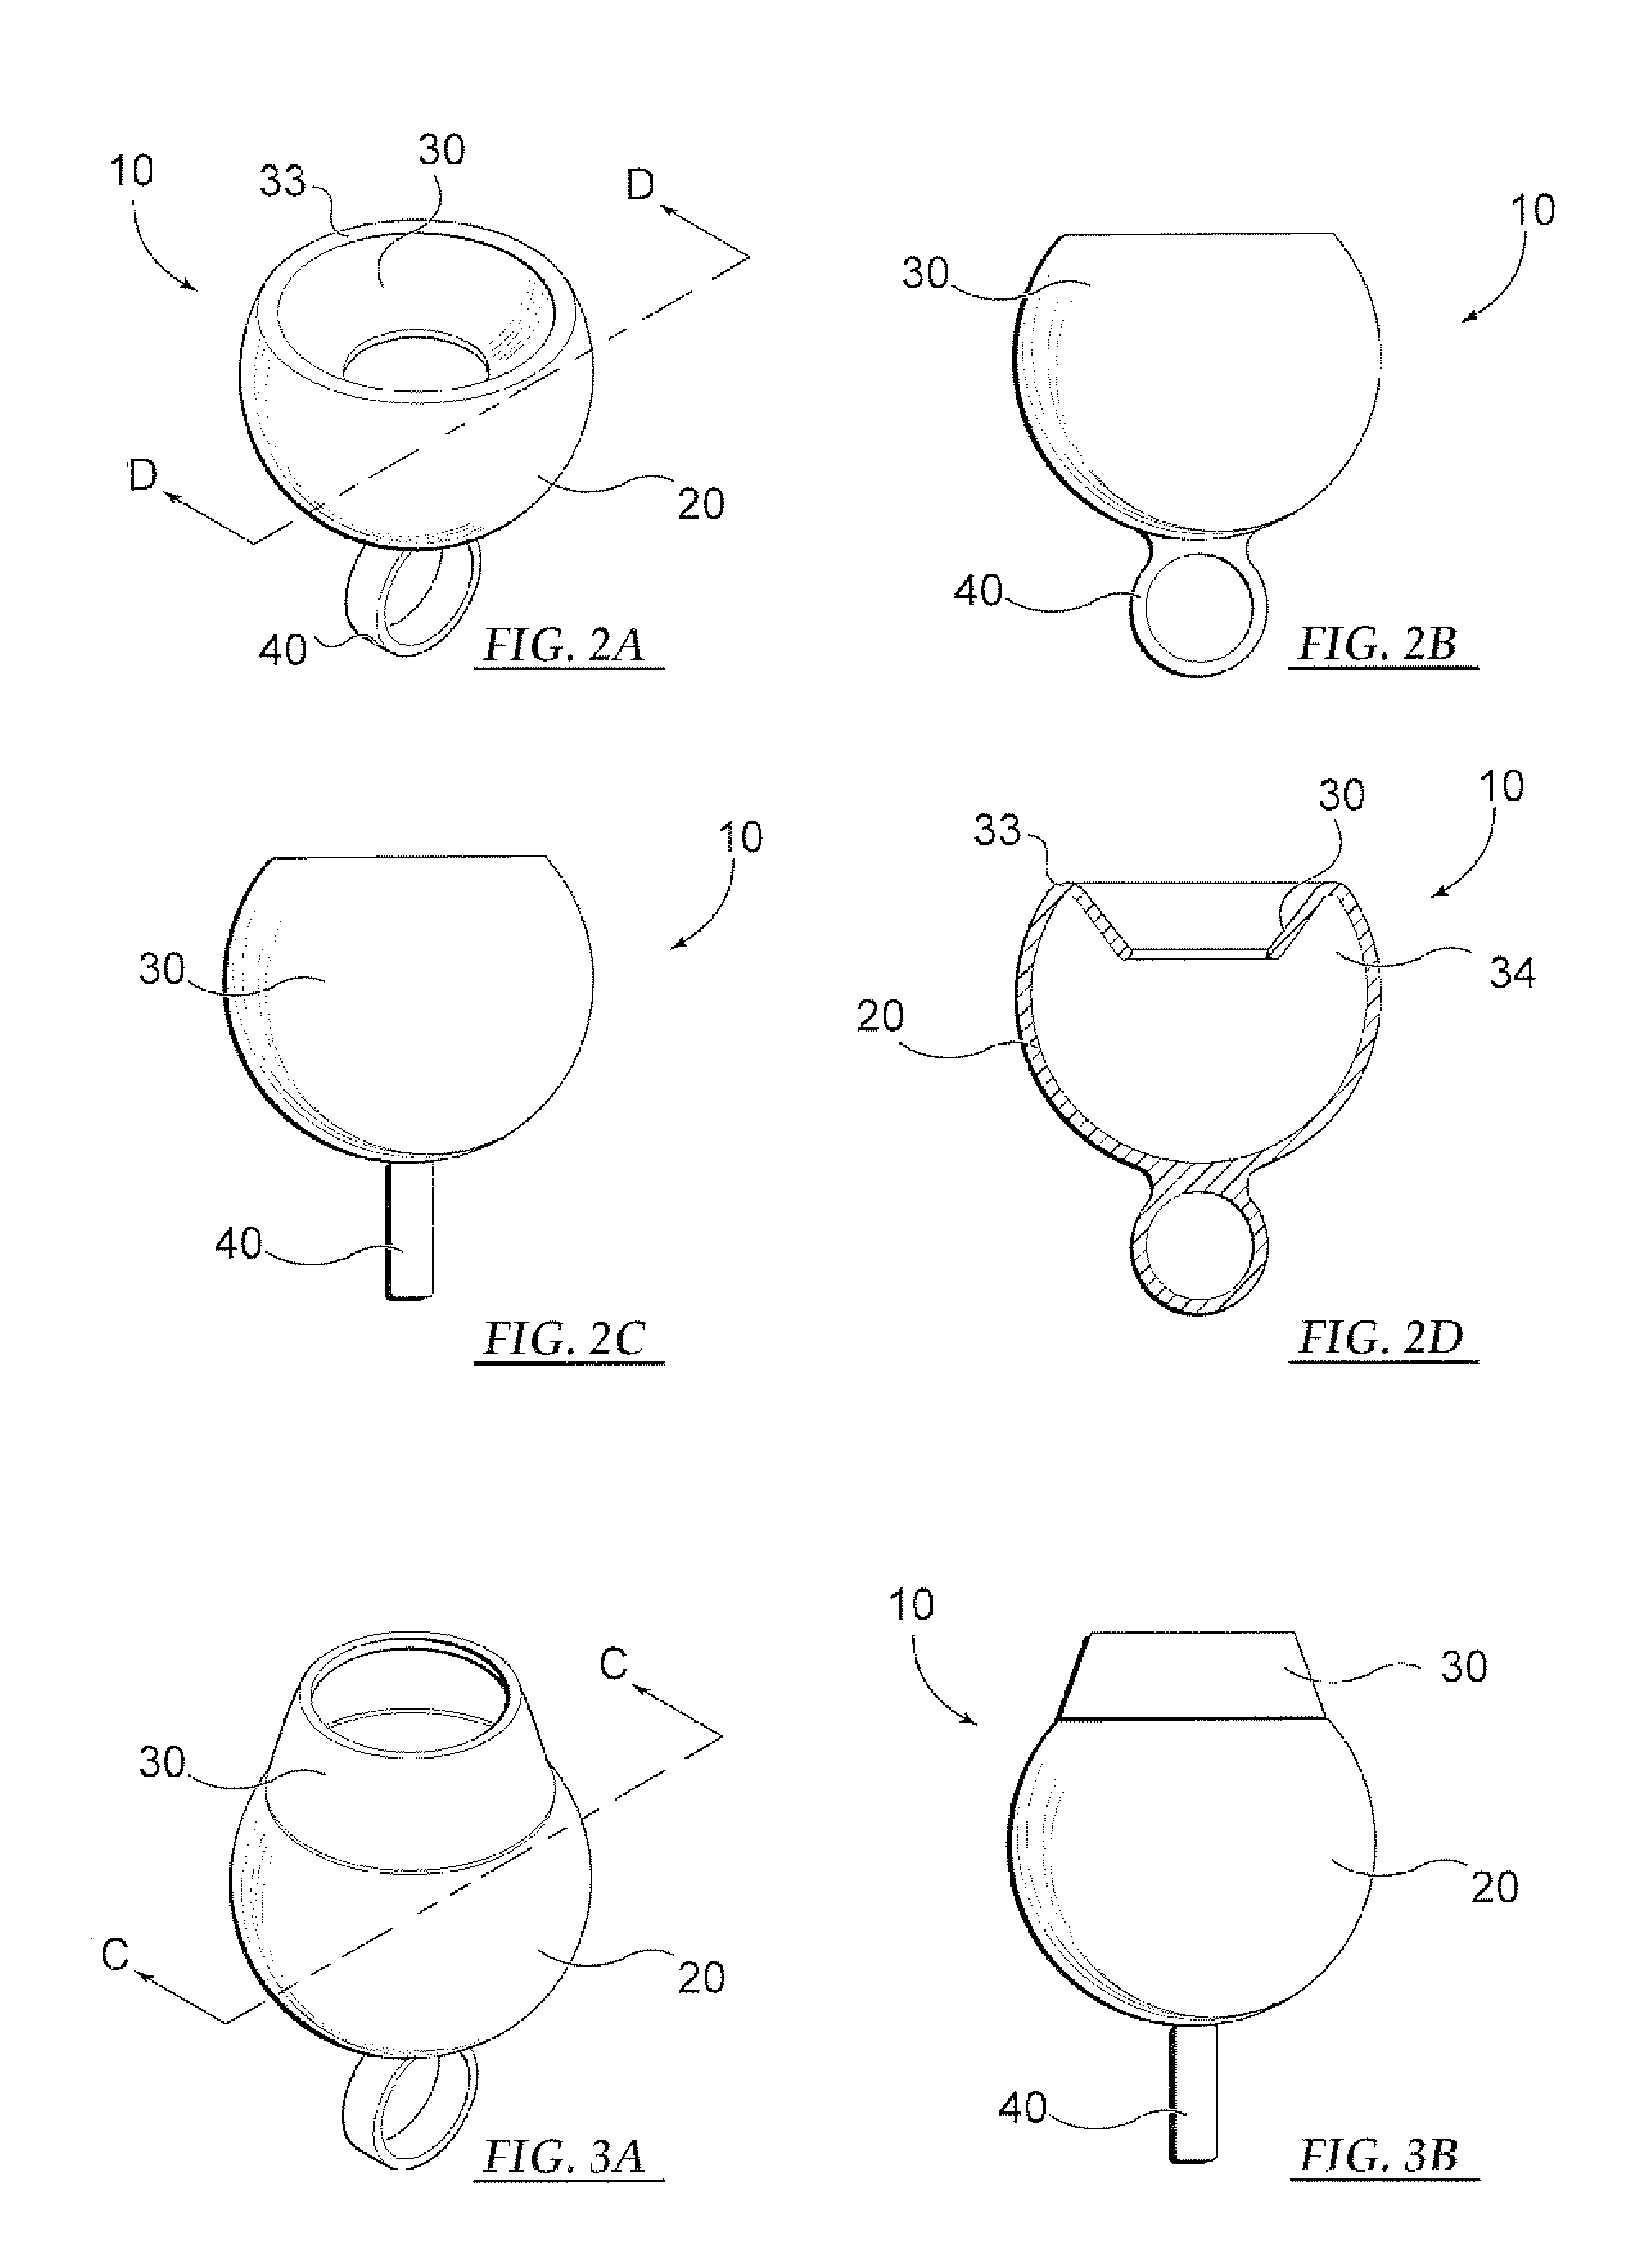 Device and Method for Menstrual Blood Collection